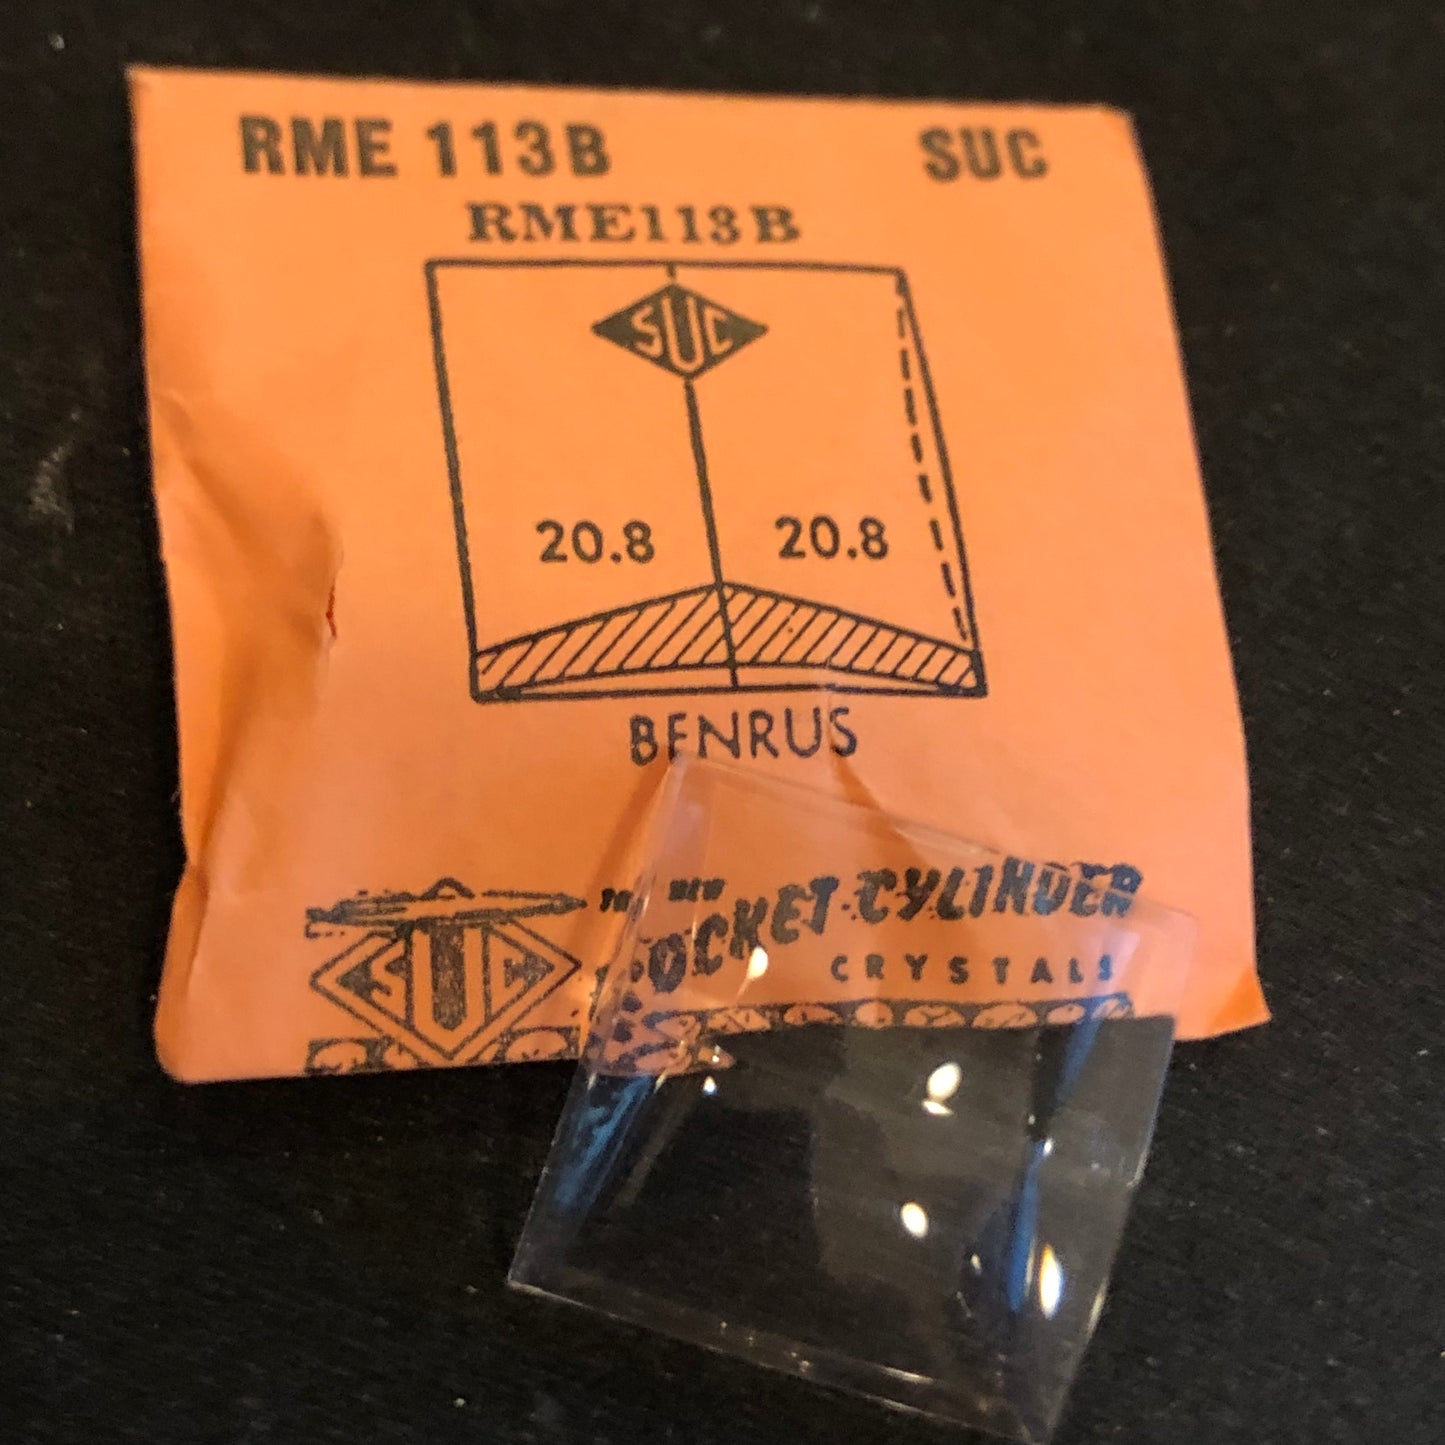 SUC Rocket Faceted Crystal RME 113B for BENRUS - 20.8 x 20.8mm - New